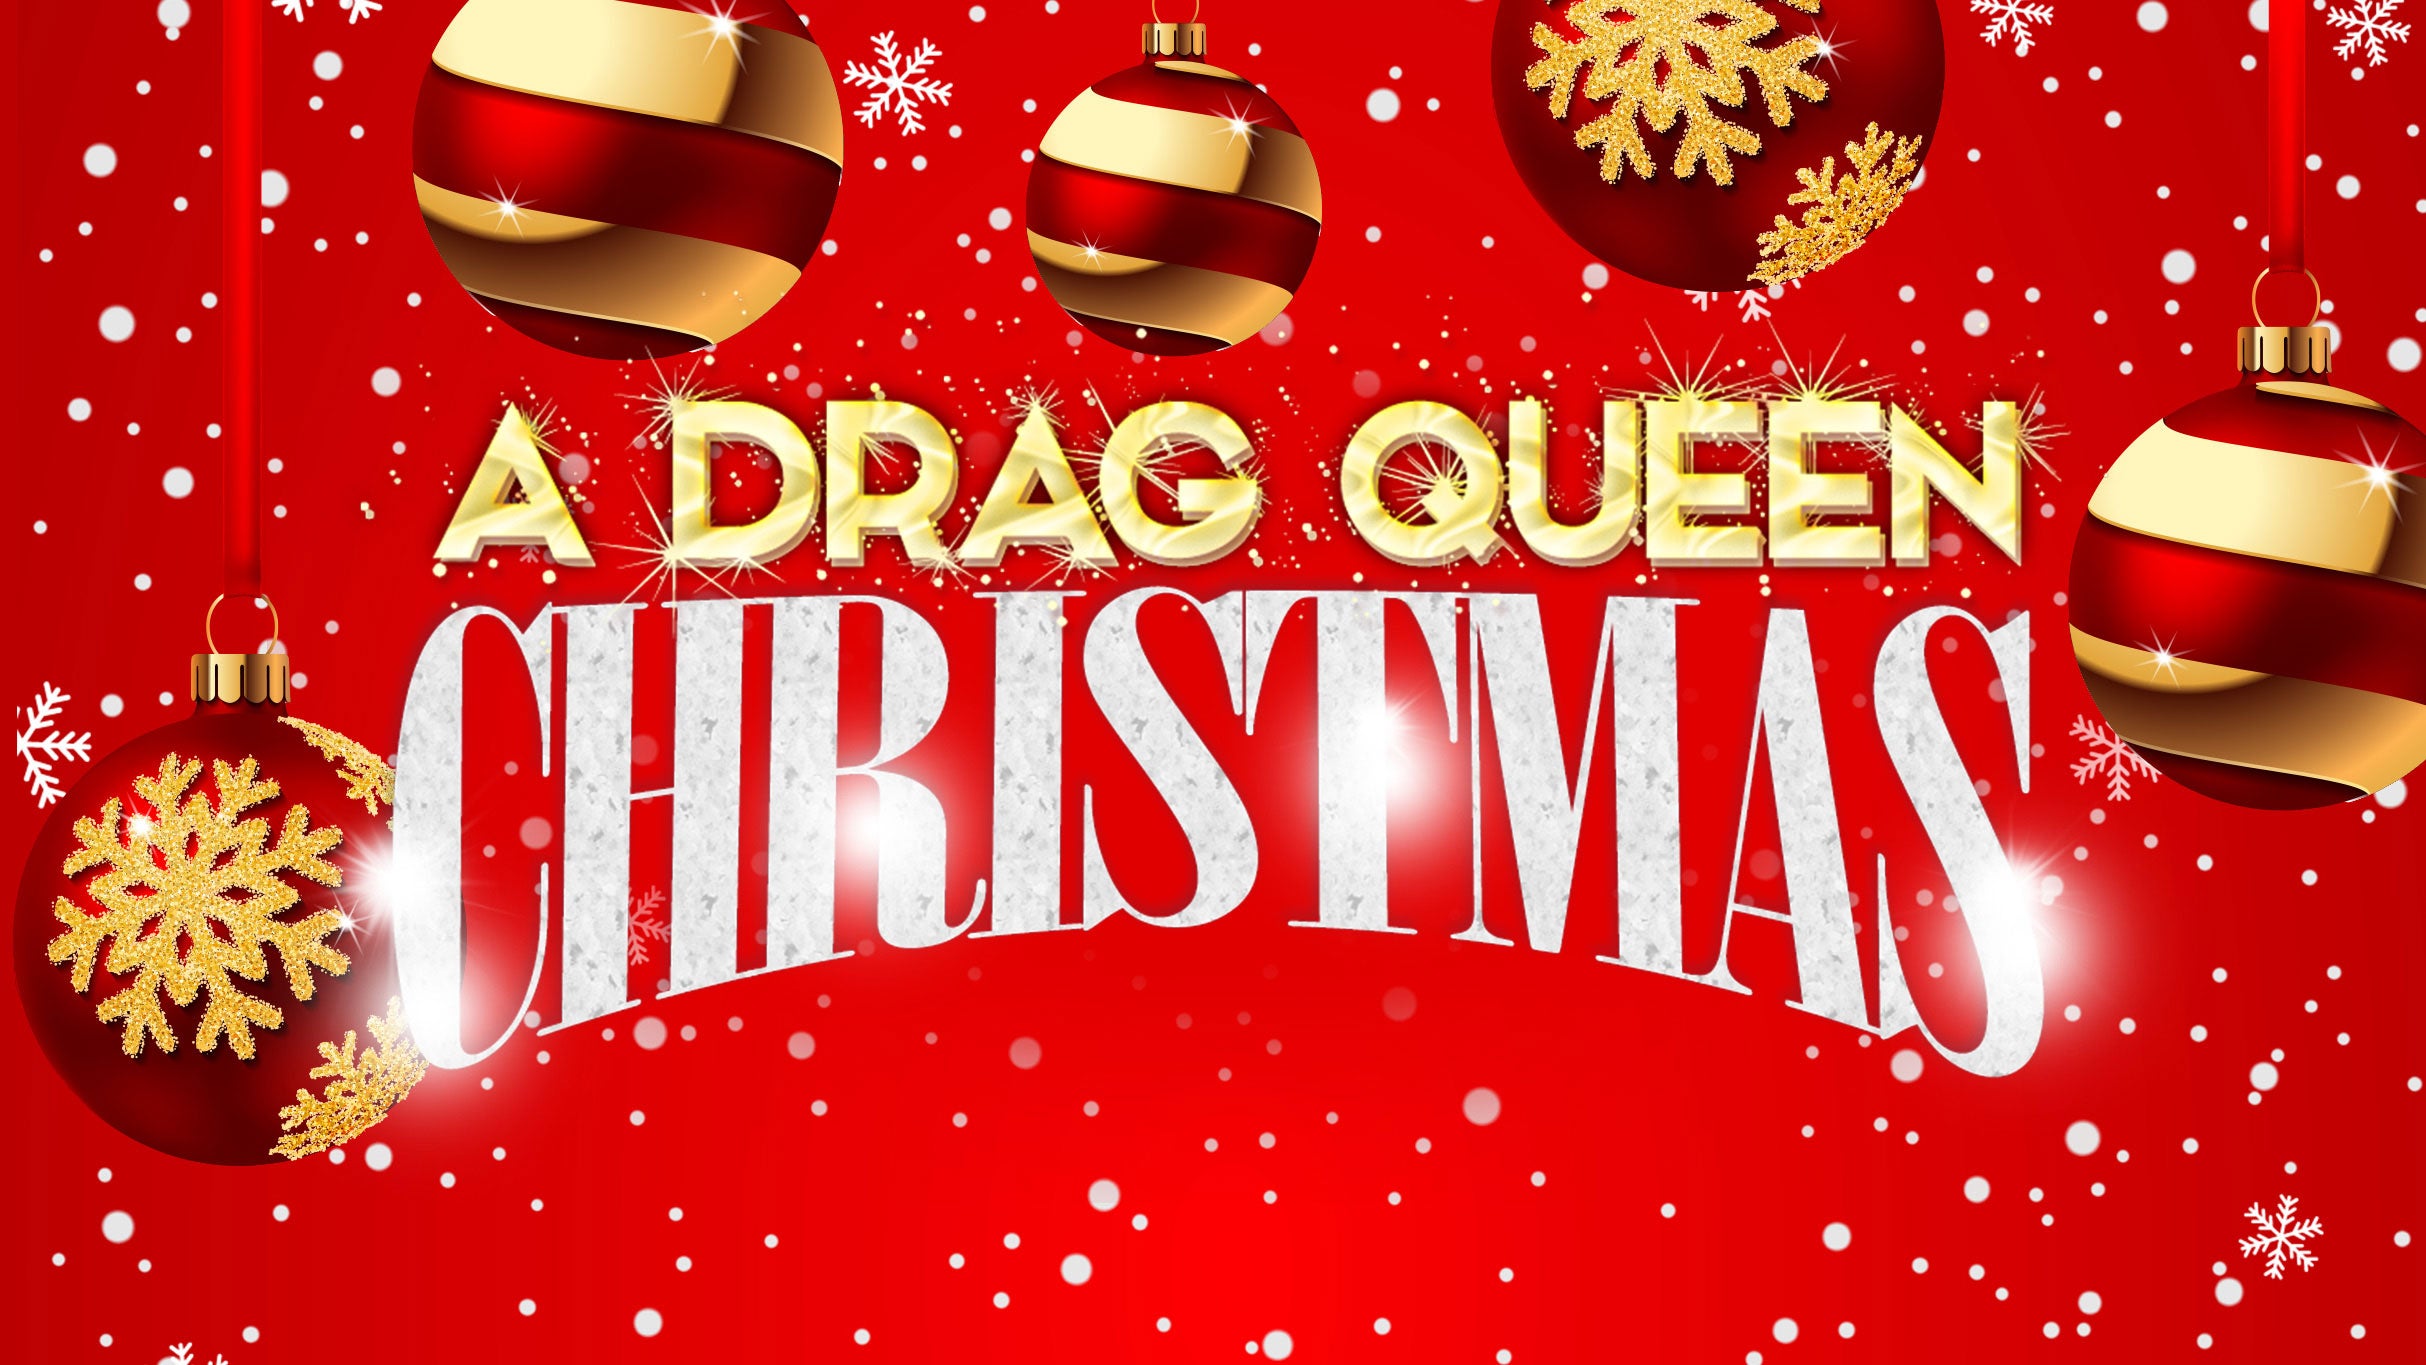 A Drag Queen Christmas free presale password for early tickets in Miami Beach